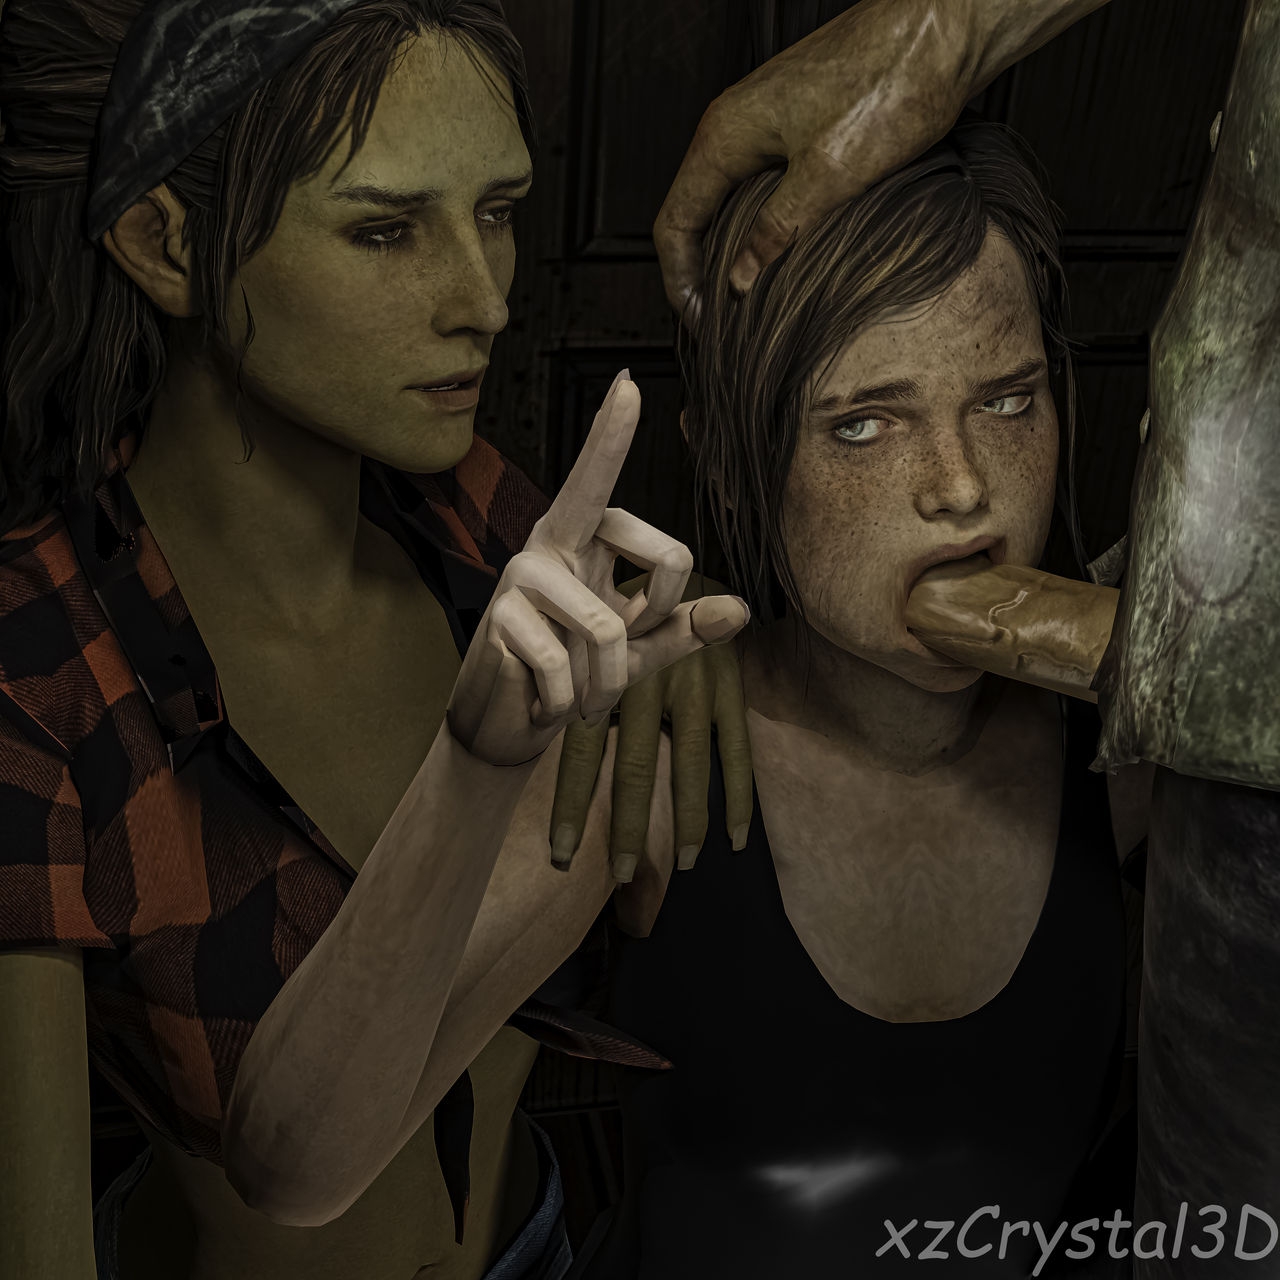 [xzCrystal3D] The Last of Us 24